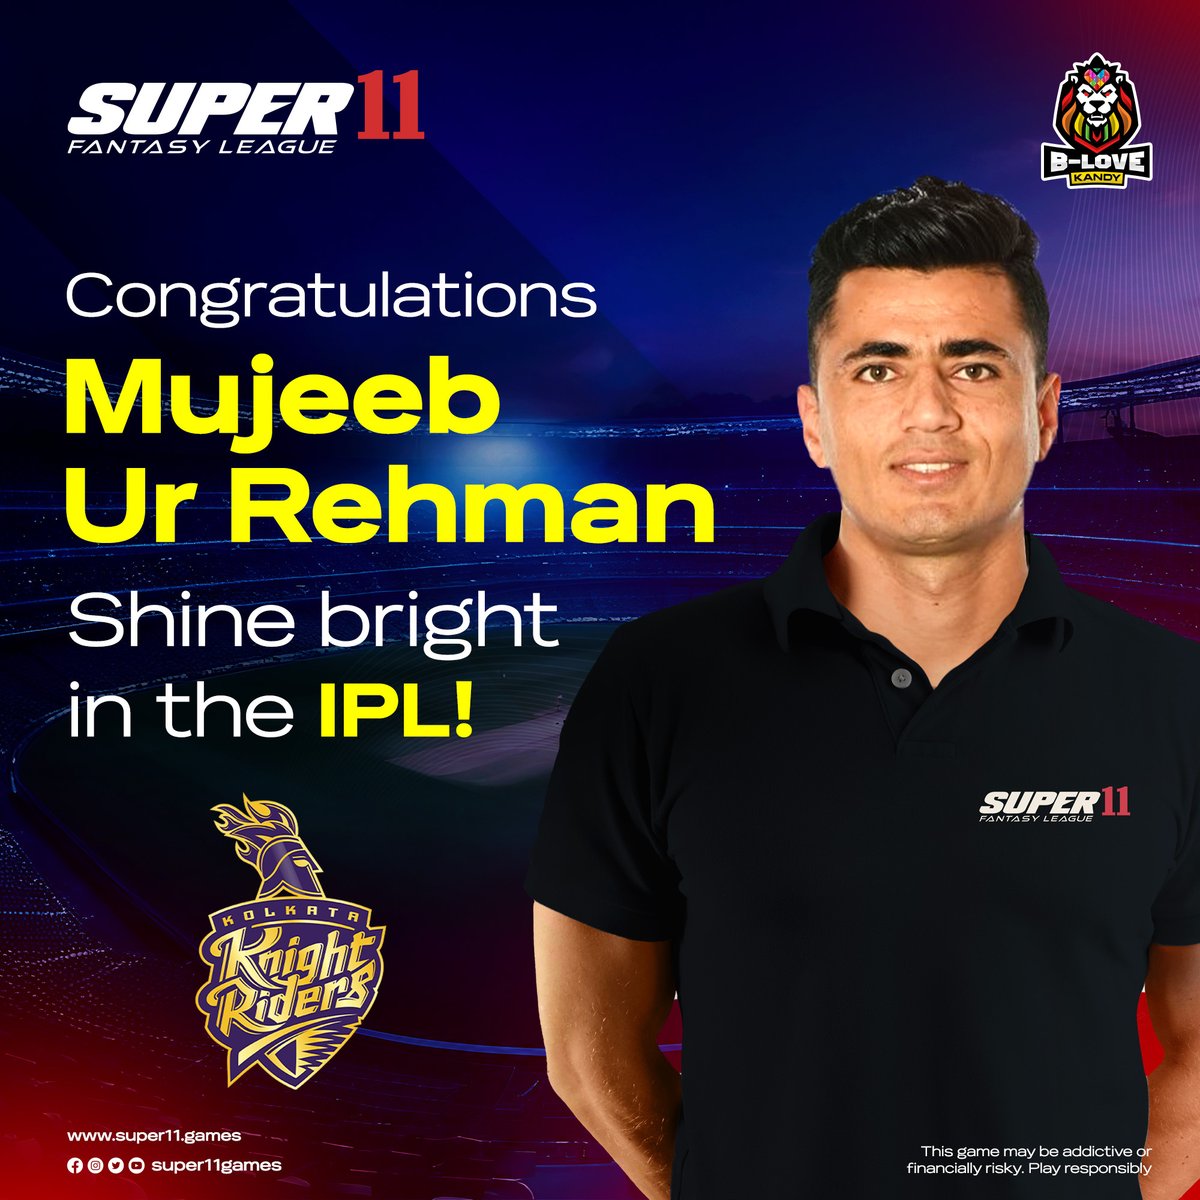 🏏🎉 Thrilled to announce that Mujeeb has been selected by the Knight Riders in the IPL! 🌟 Congratulations to him! 🎊 Play super and shine bright! #IPL2024 #waninduhasaranga #super11 #BLoveKandy #IPL #MujeebZardan #KnightRiders